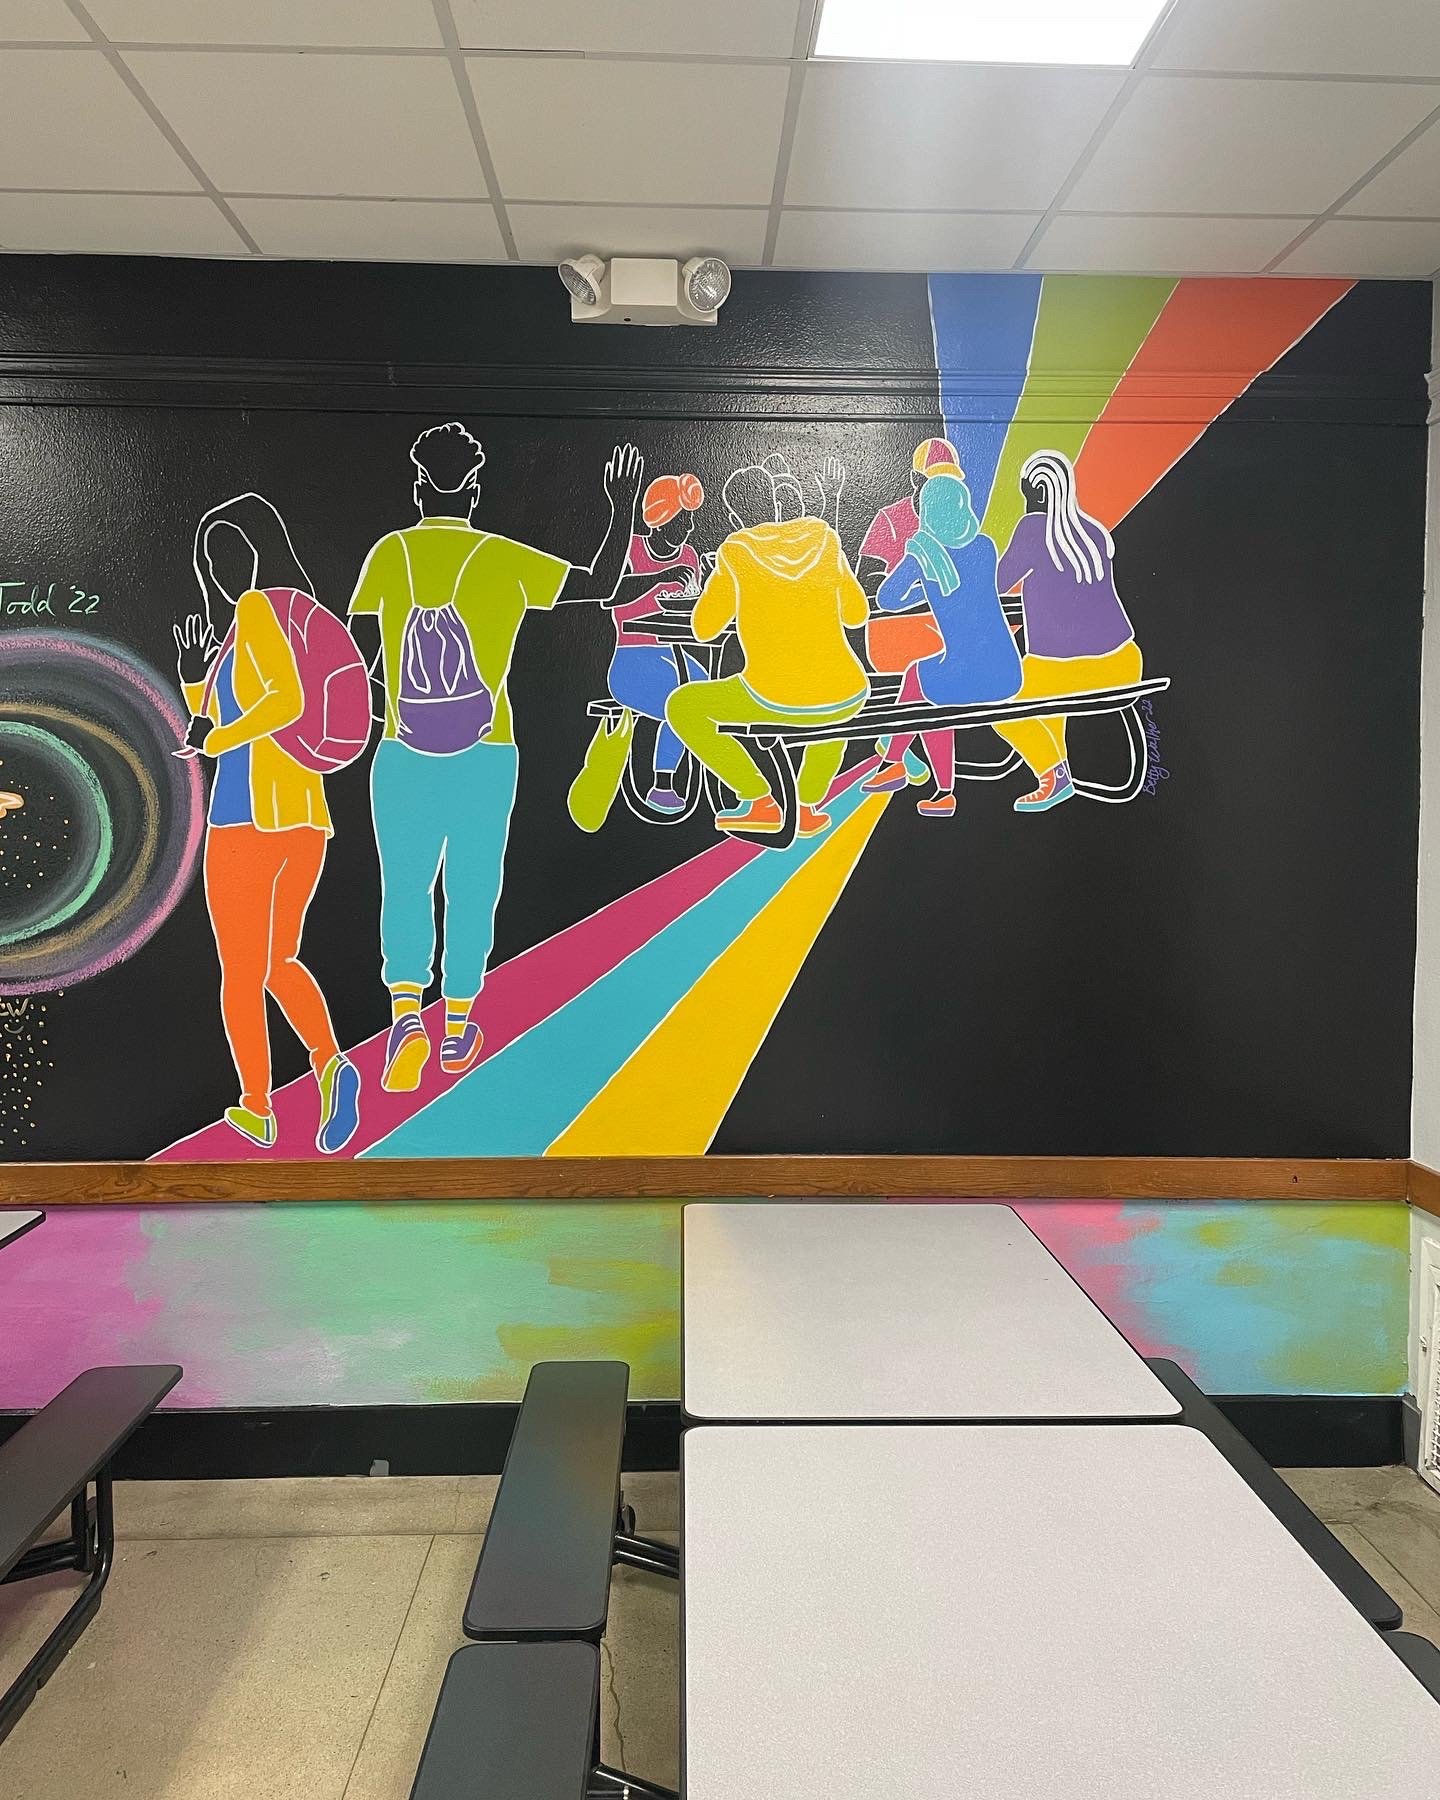 DMPS Cafeteria Mural Based on Student Ideas